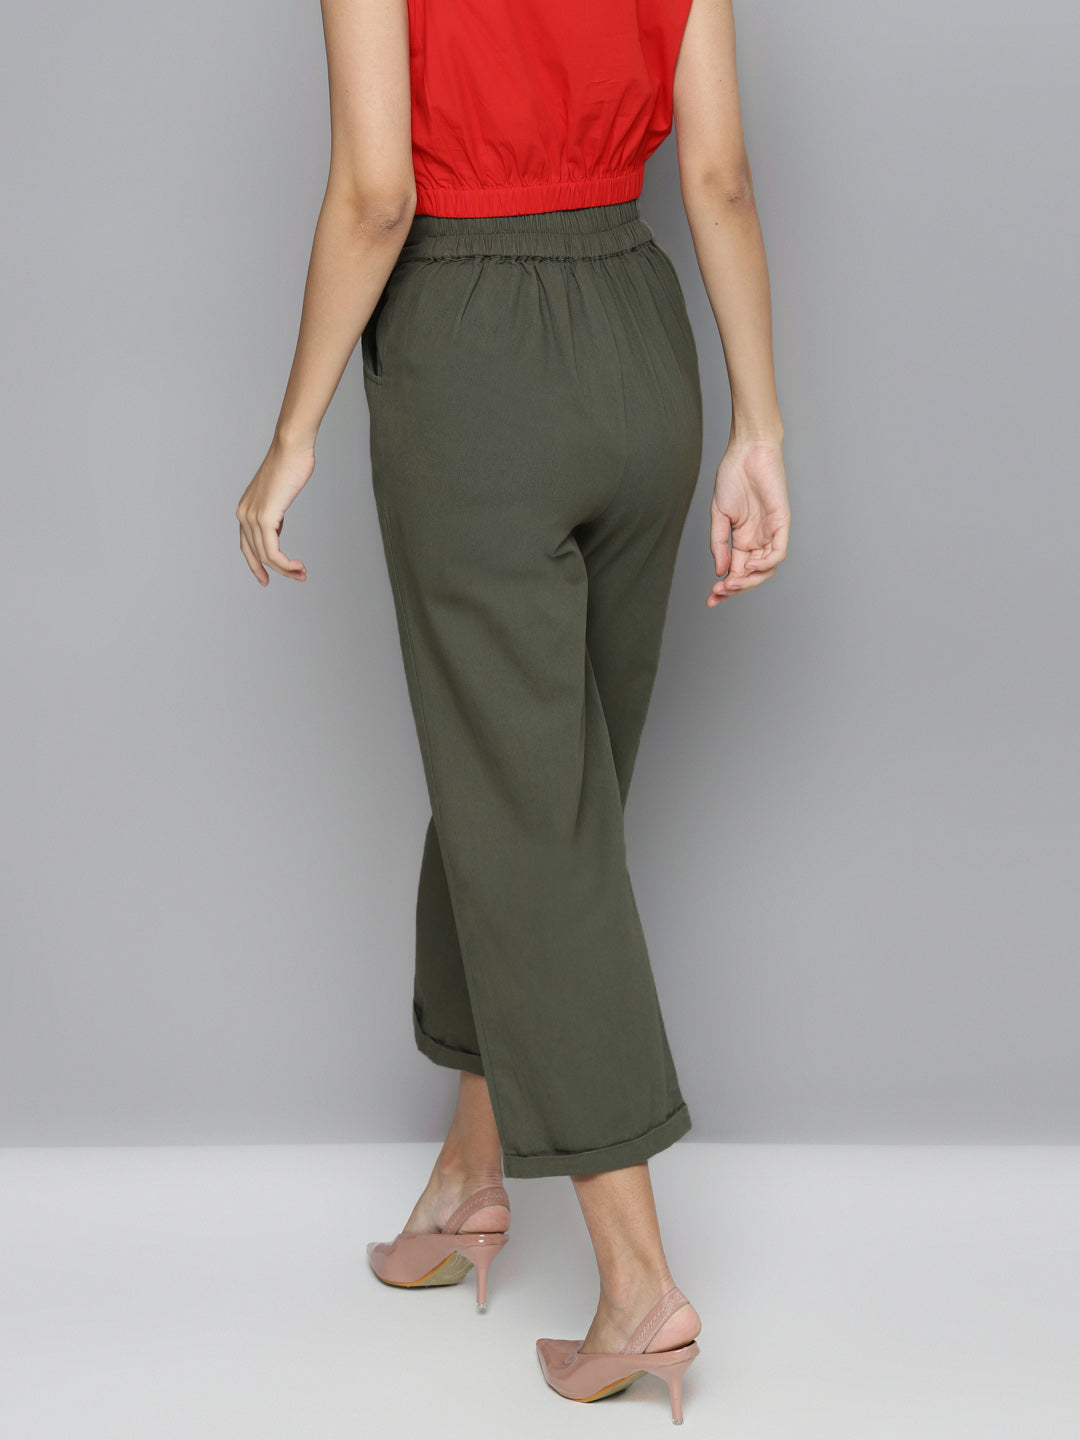 Women Olive Green Solid High-Rise Skinny Fit Formal Trouser